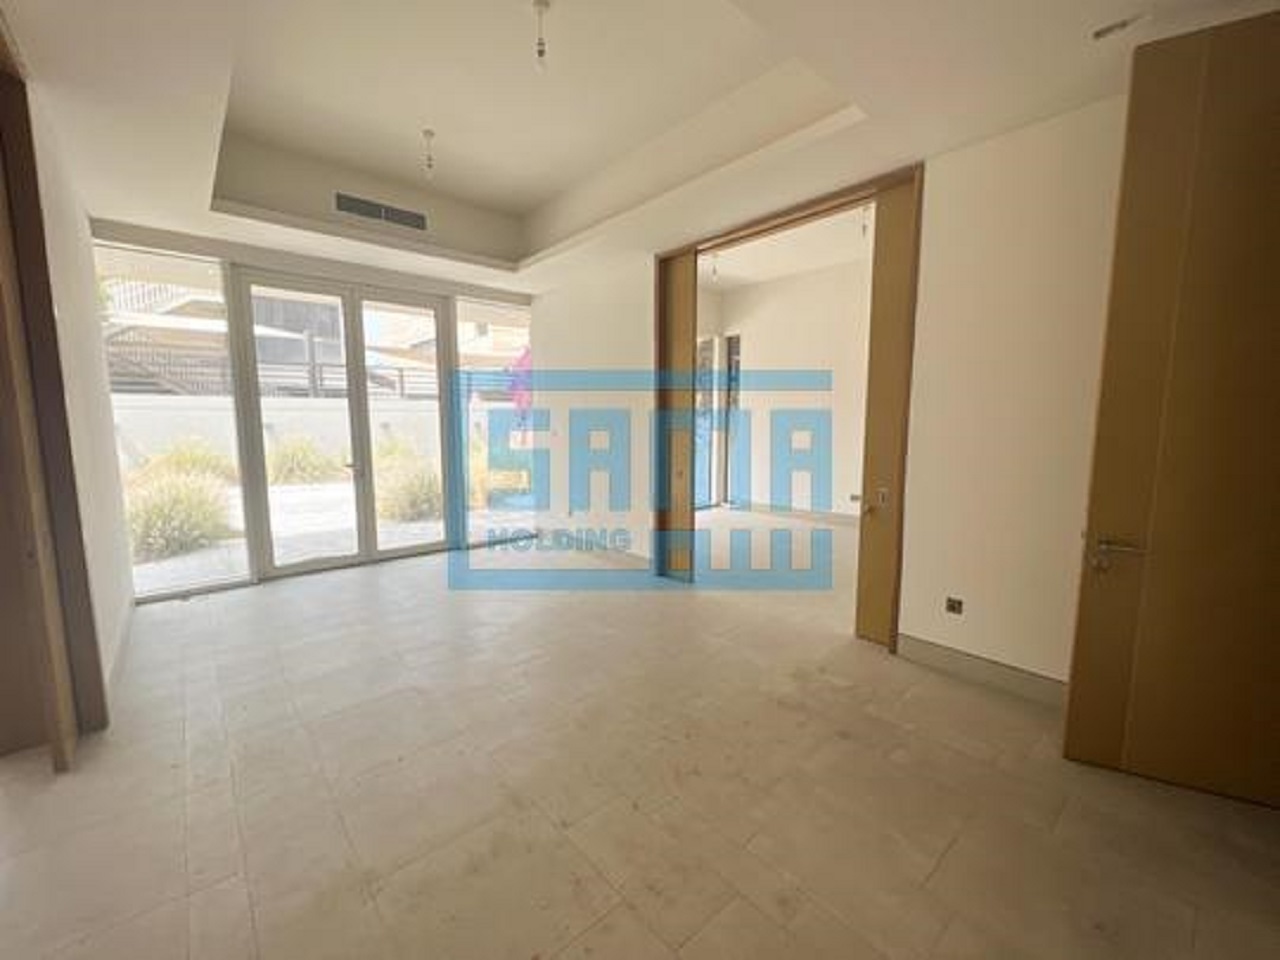 Luxurious Commercial Villa with 6 Bedrooms for Rent located in Al Nahyan Area, Abu Dhabi